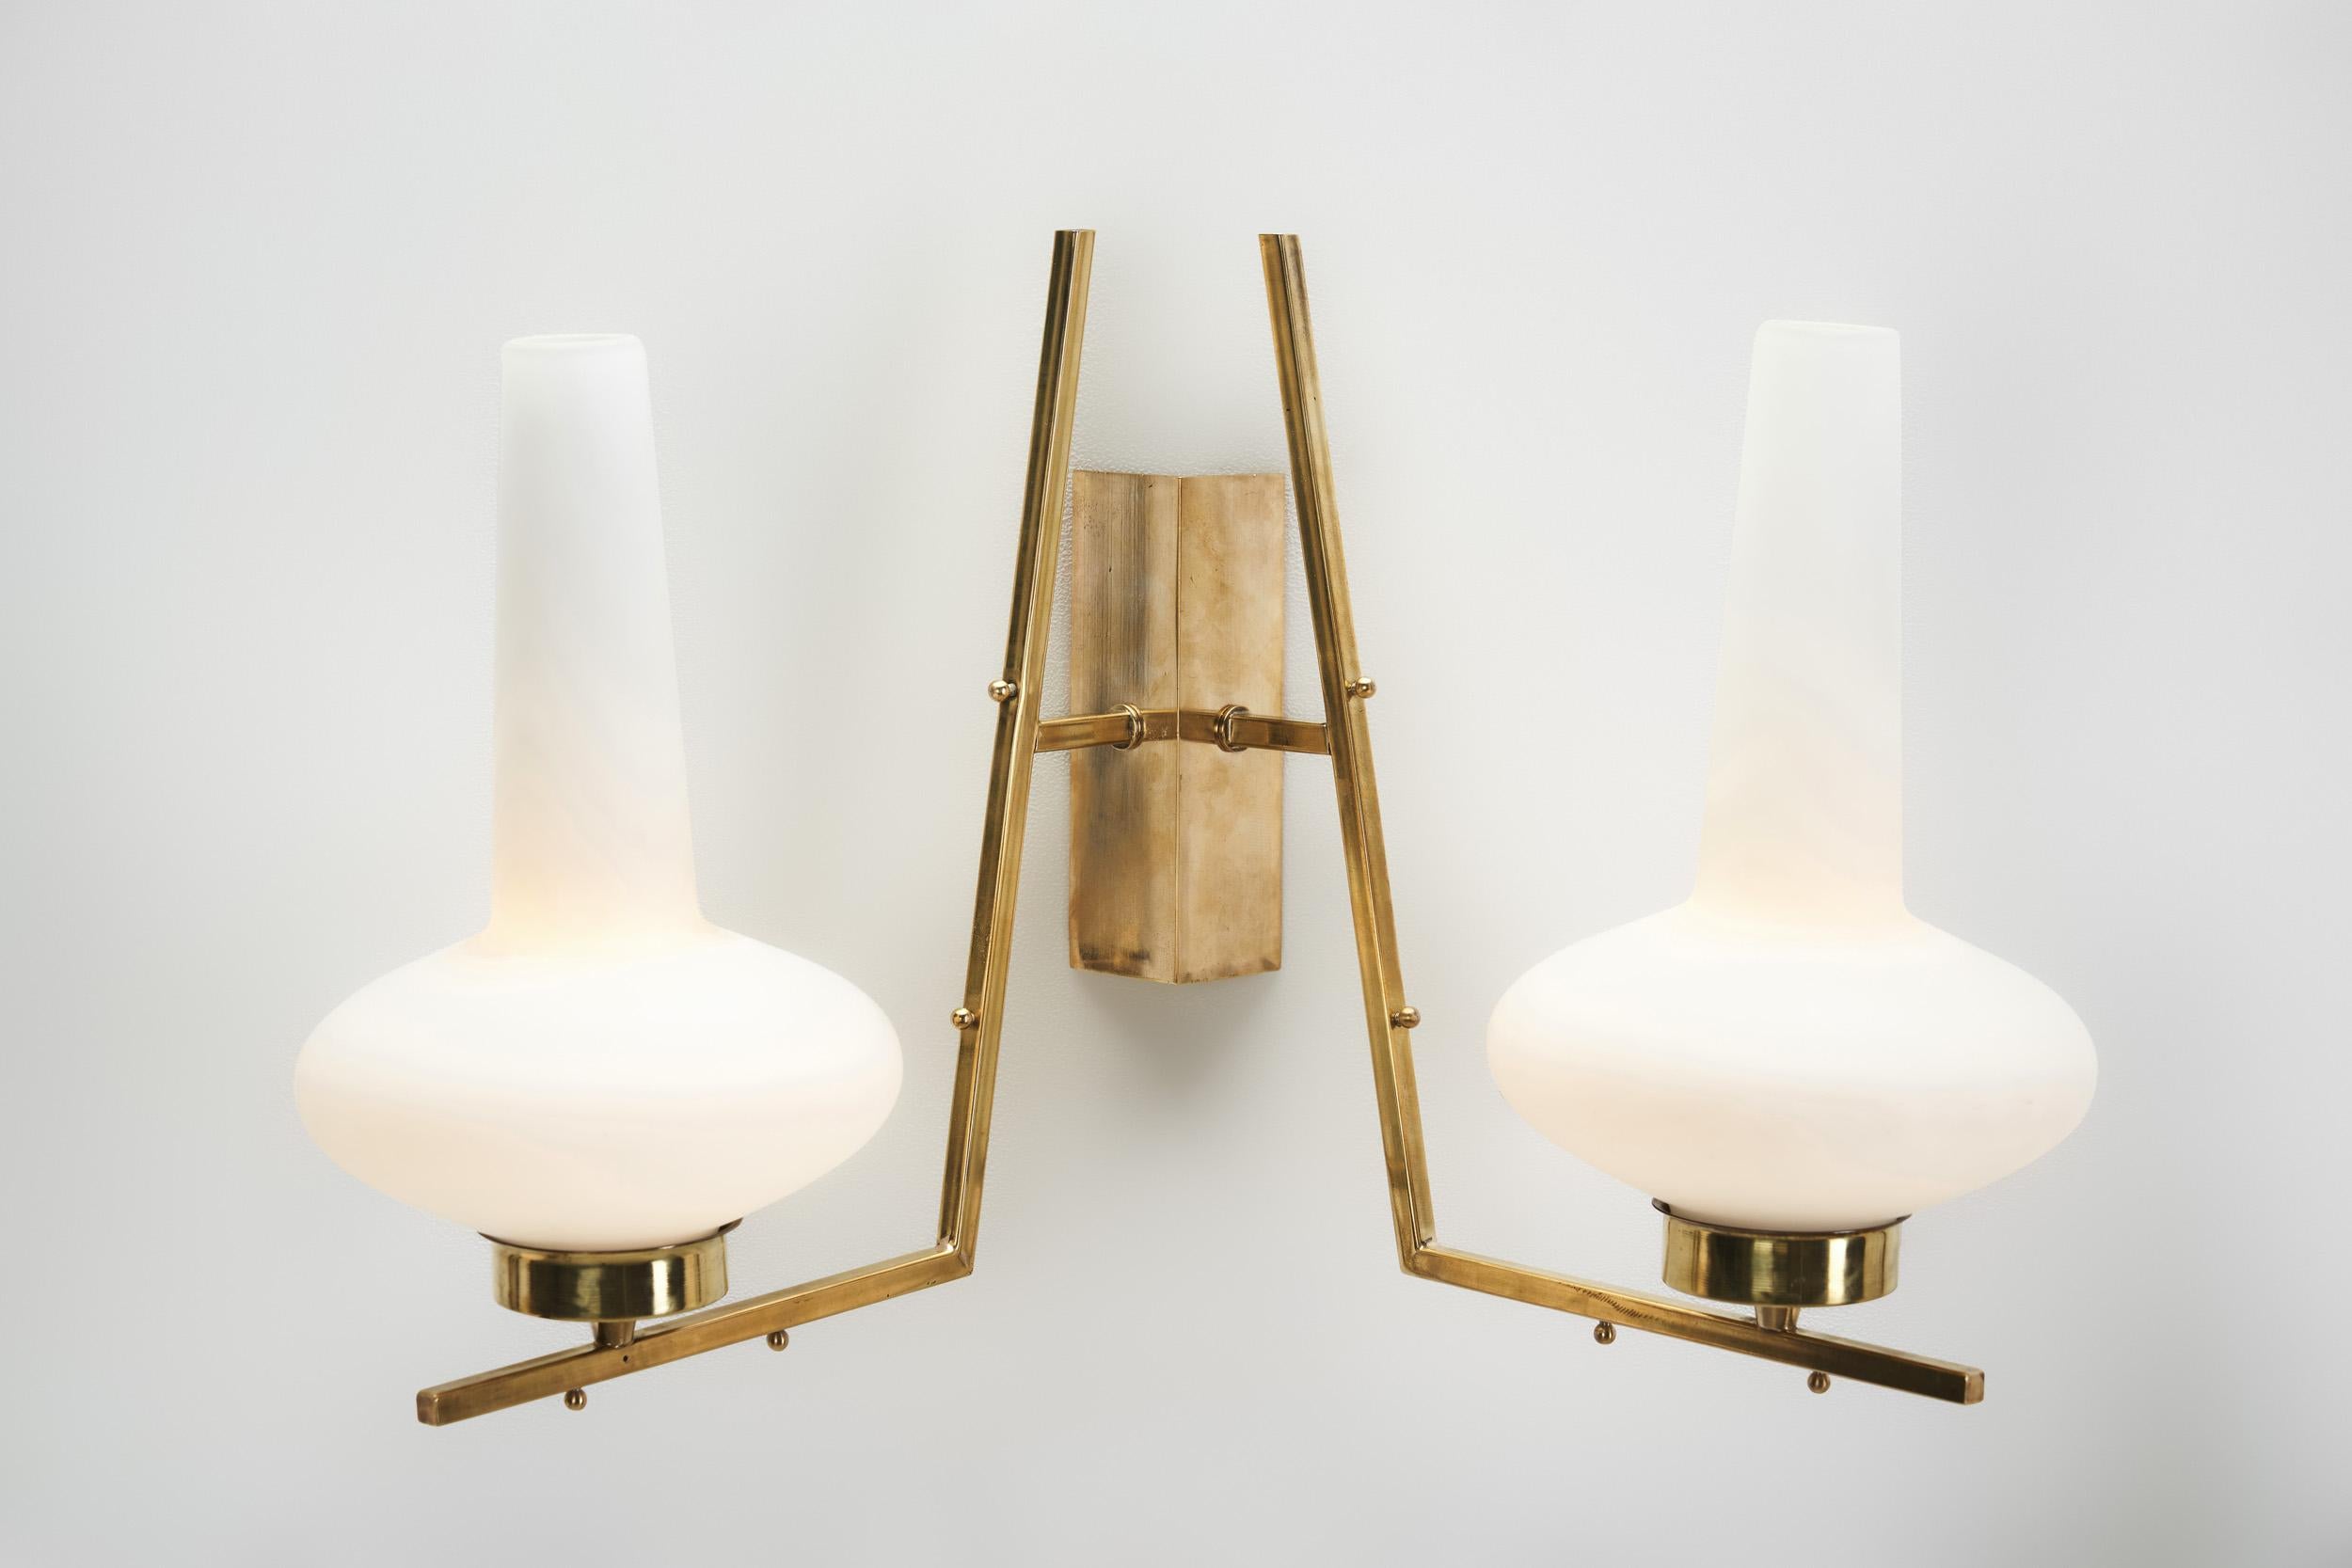 Italian Mid-Century Modern Brass and Glass Wall Lamps, Italy 1950s For Sale 3